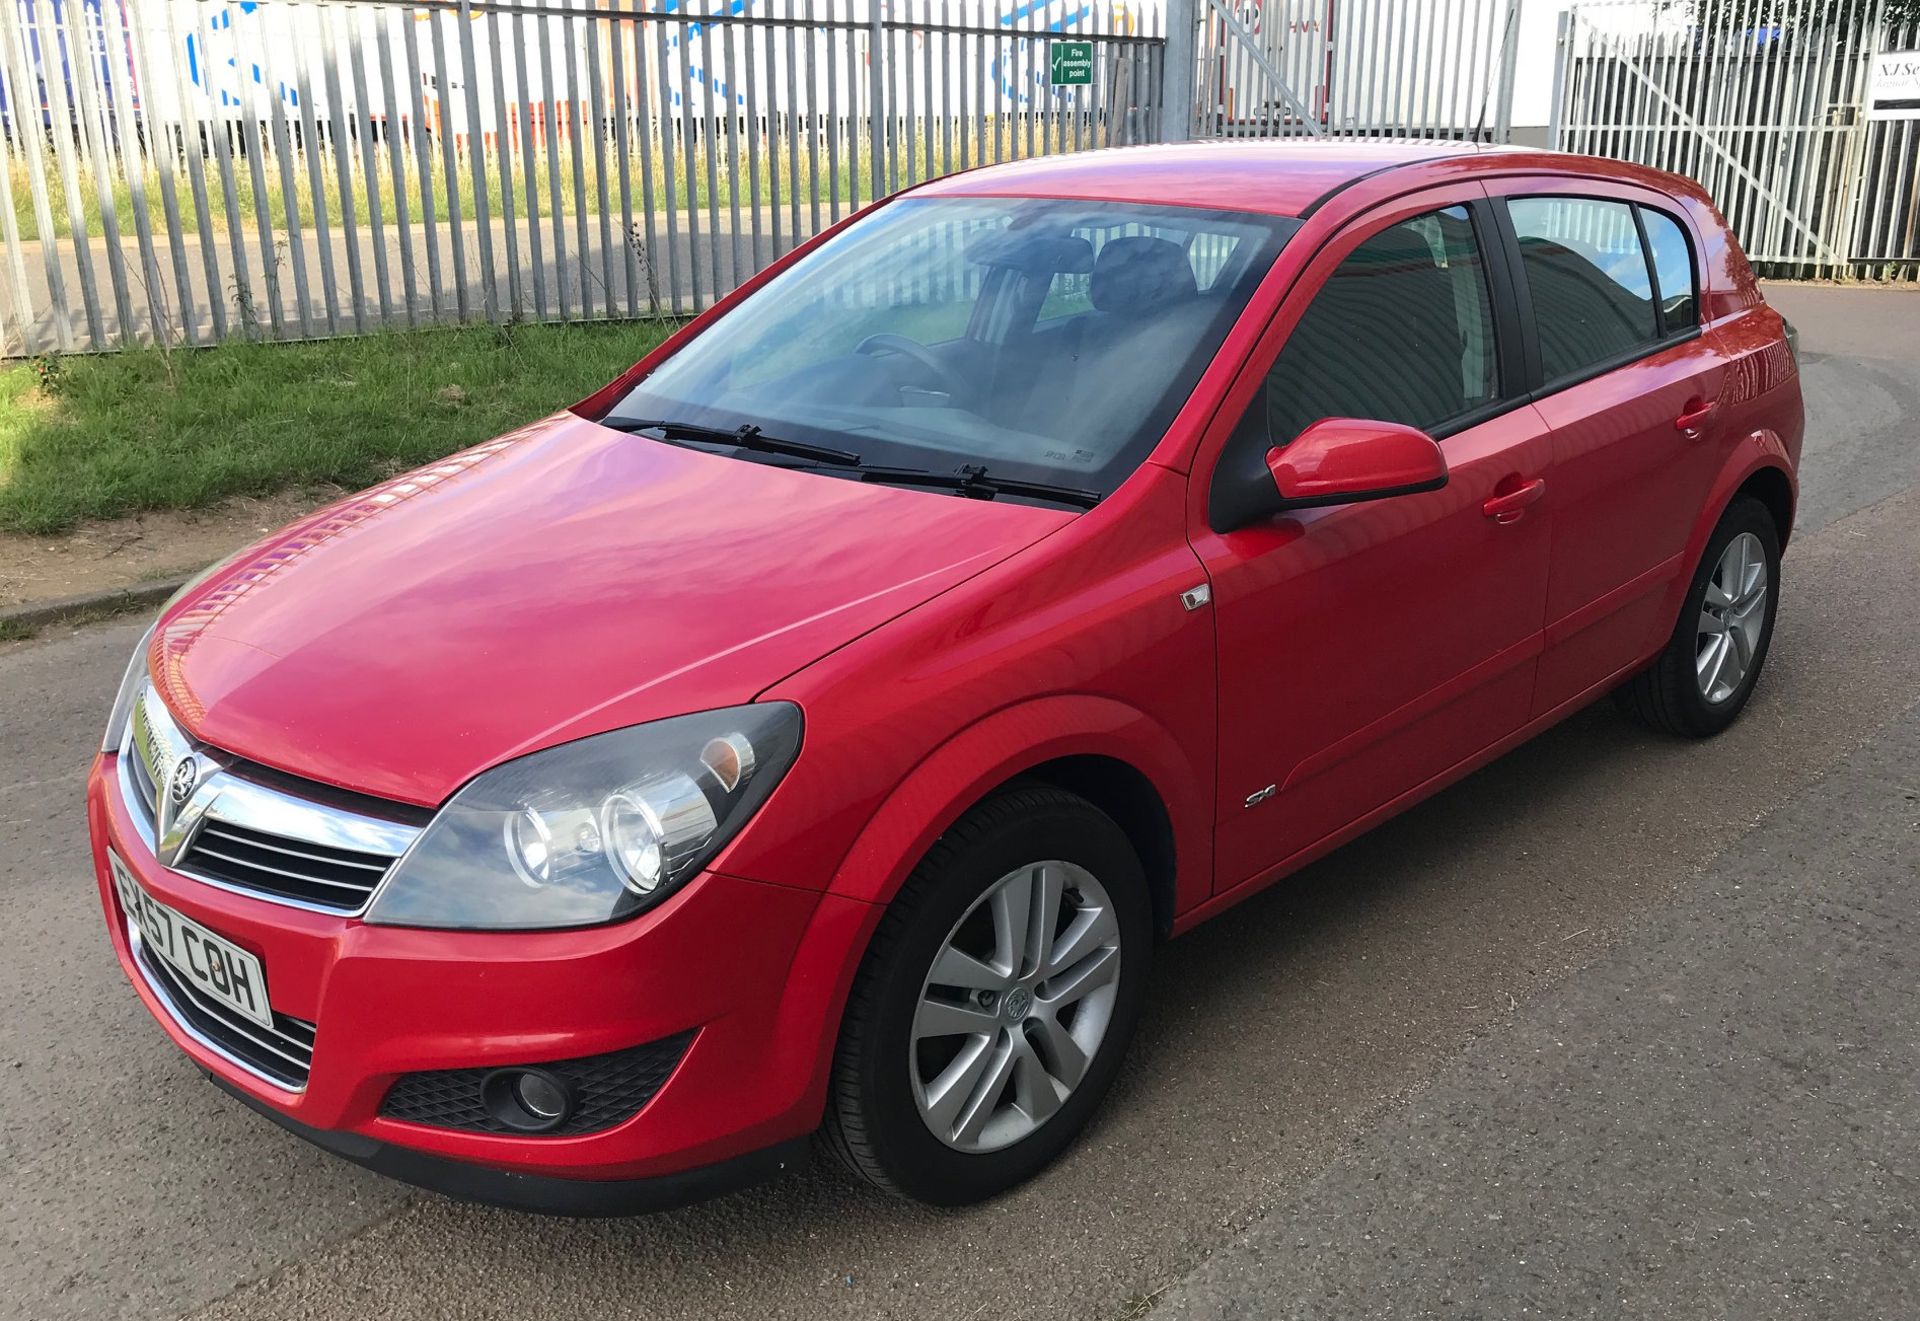 2007 Vauxhall Astra SXI 1.7 CDTI 5Dr Hatchback - CL505 - NO VAT ON THE HAMMER - Location: - Image 10 of 15